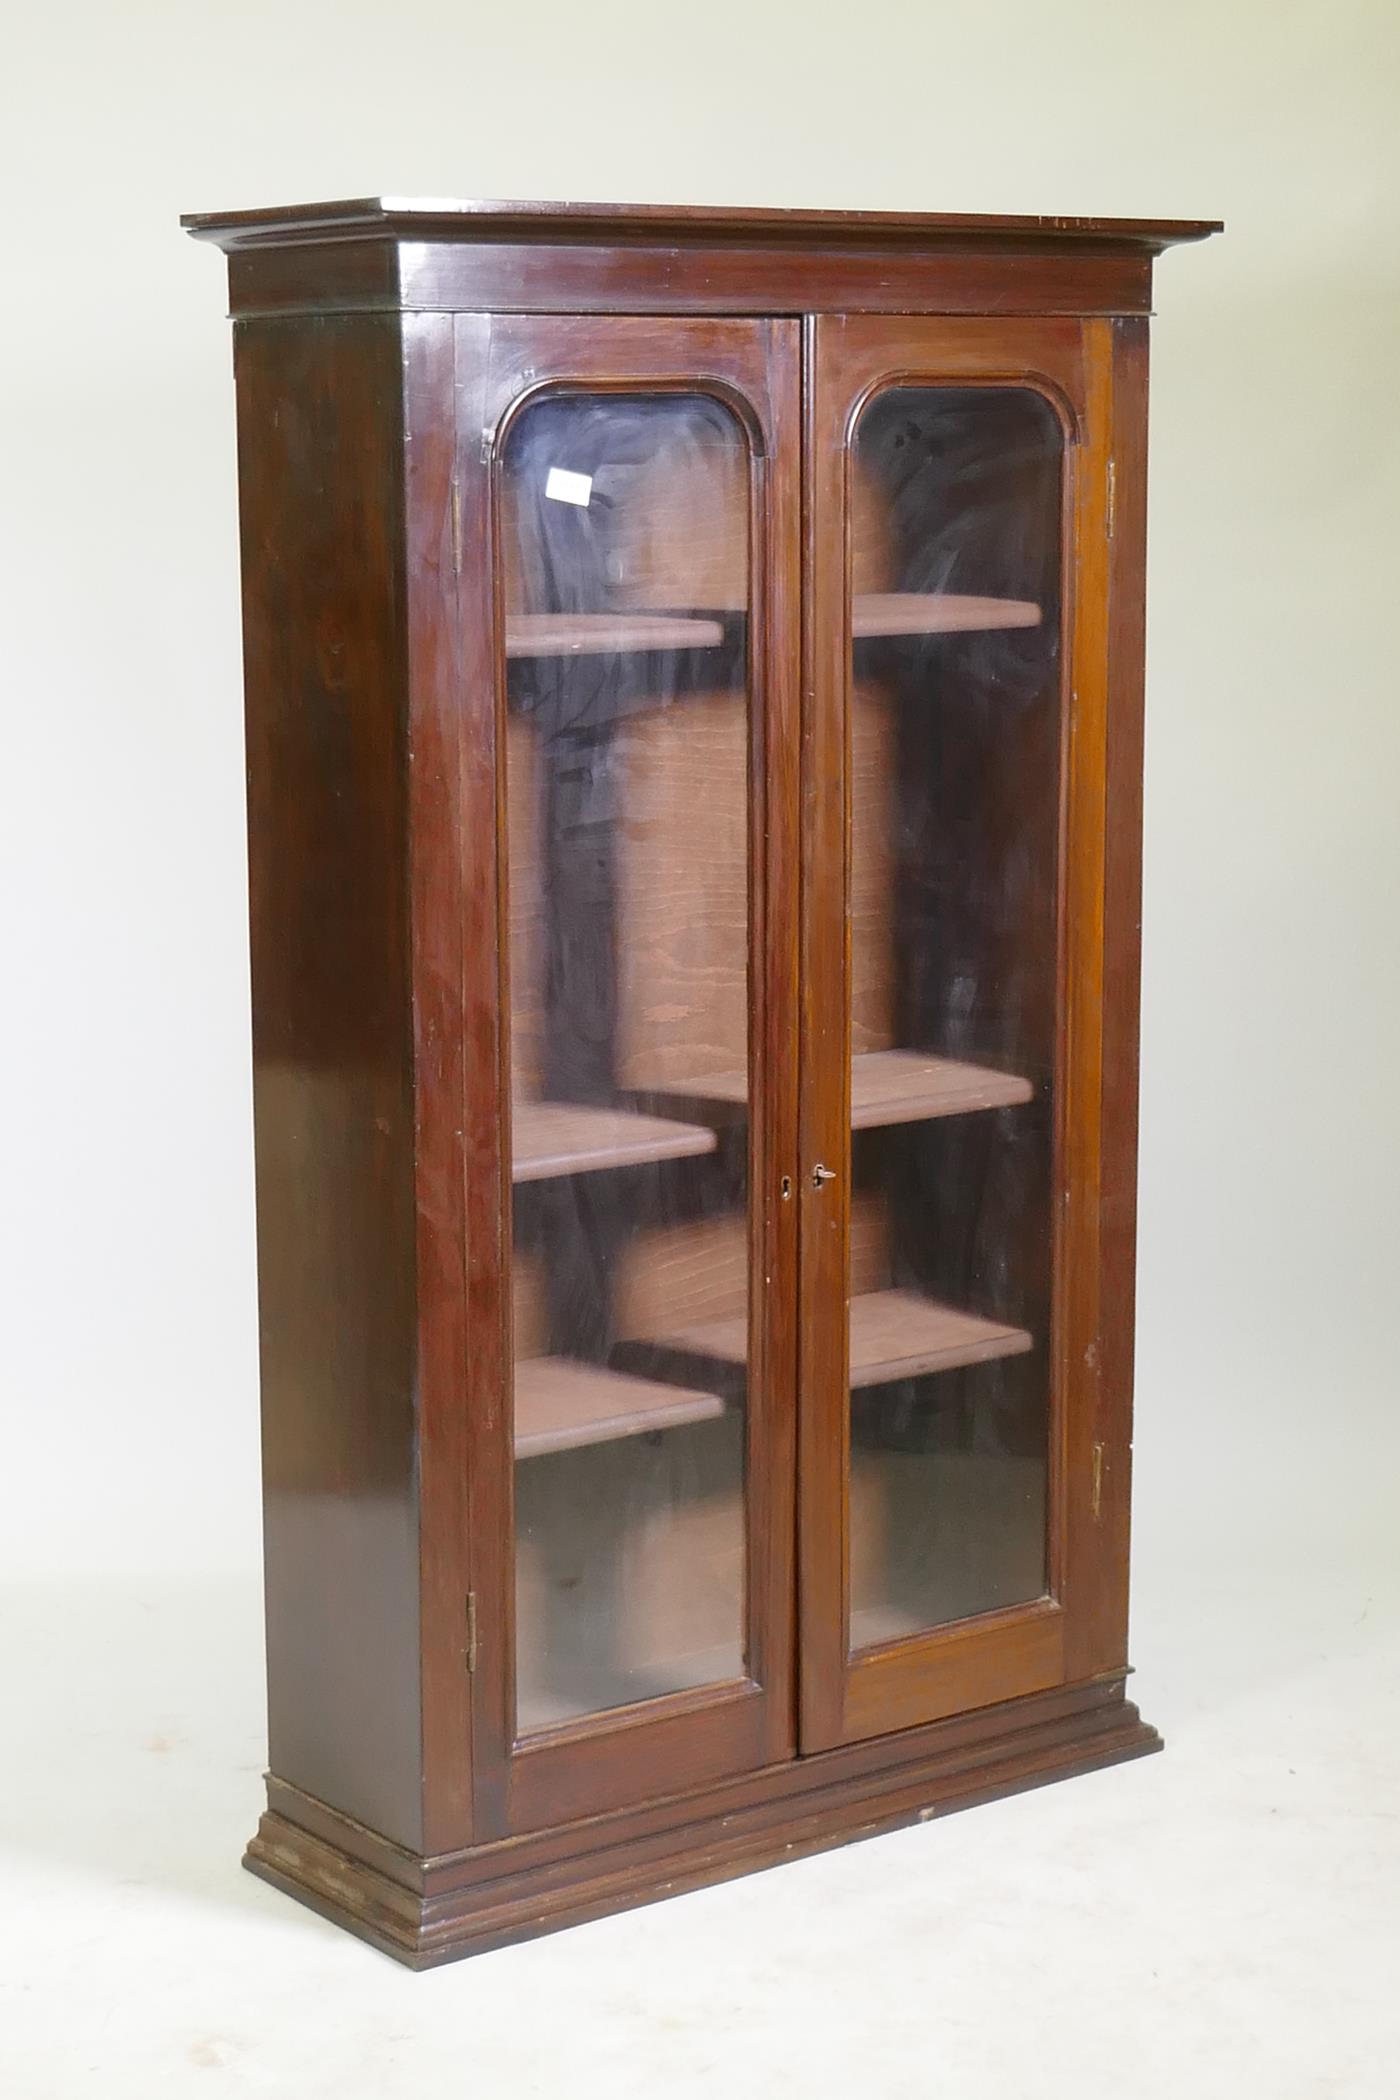 A Victorian mahogany bookcase with two arched glazed doors, raised on a shaped plinth, 86 x 30 x